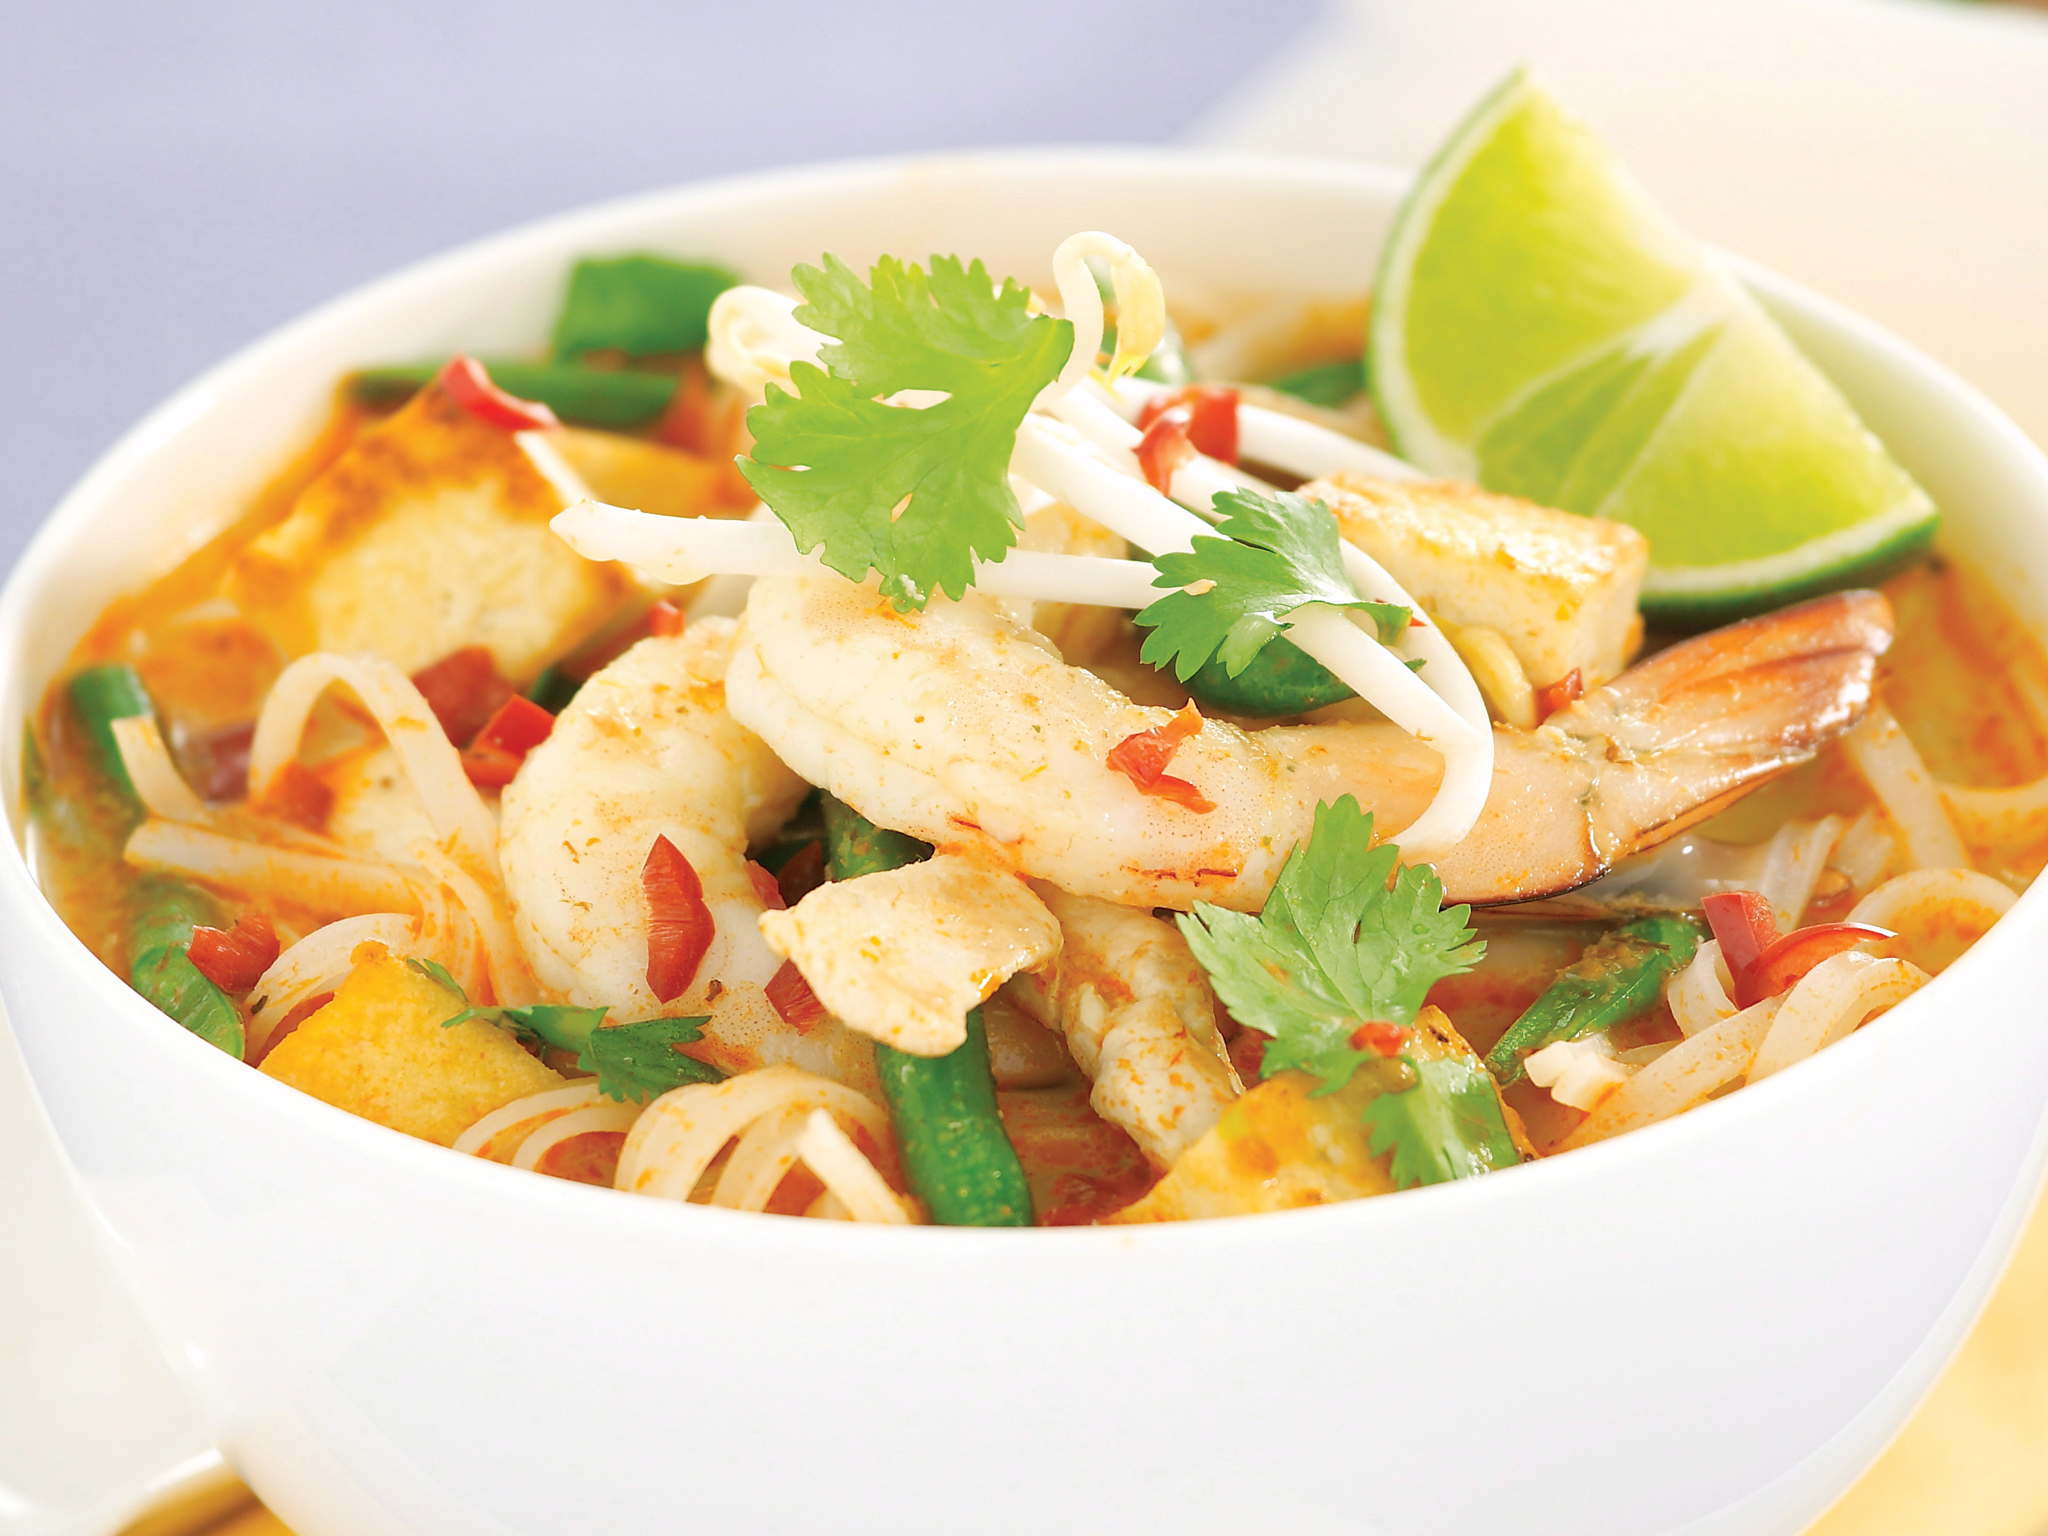 Spice of life - Chicken and Prawn Laksa